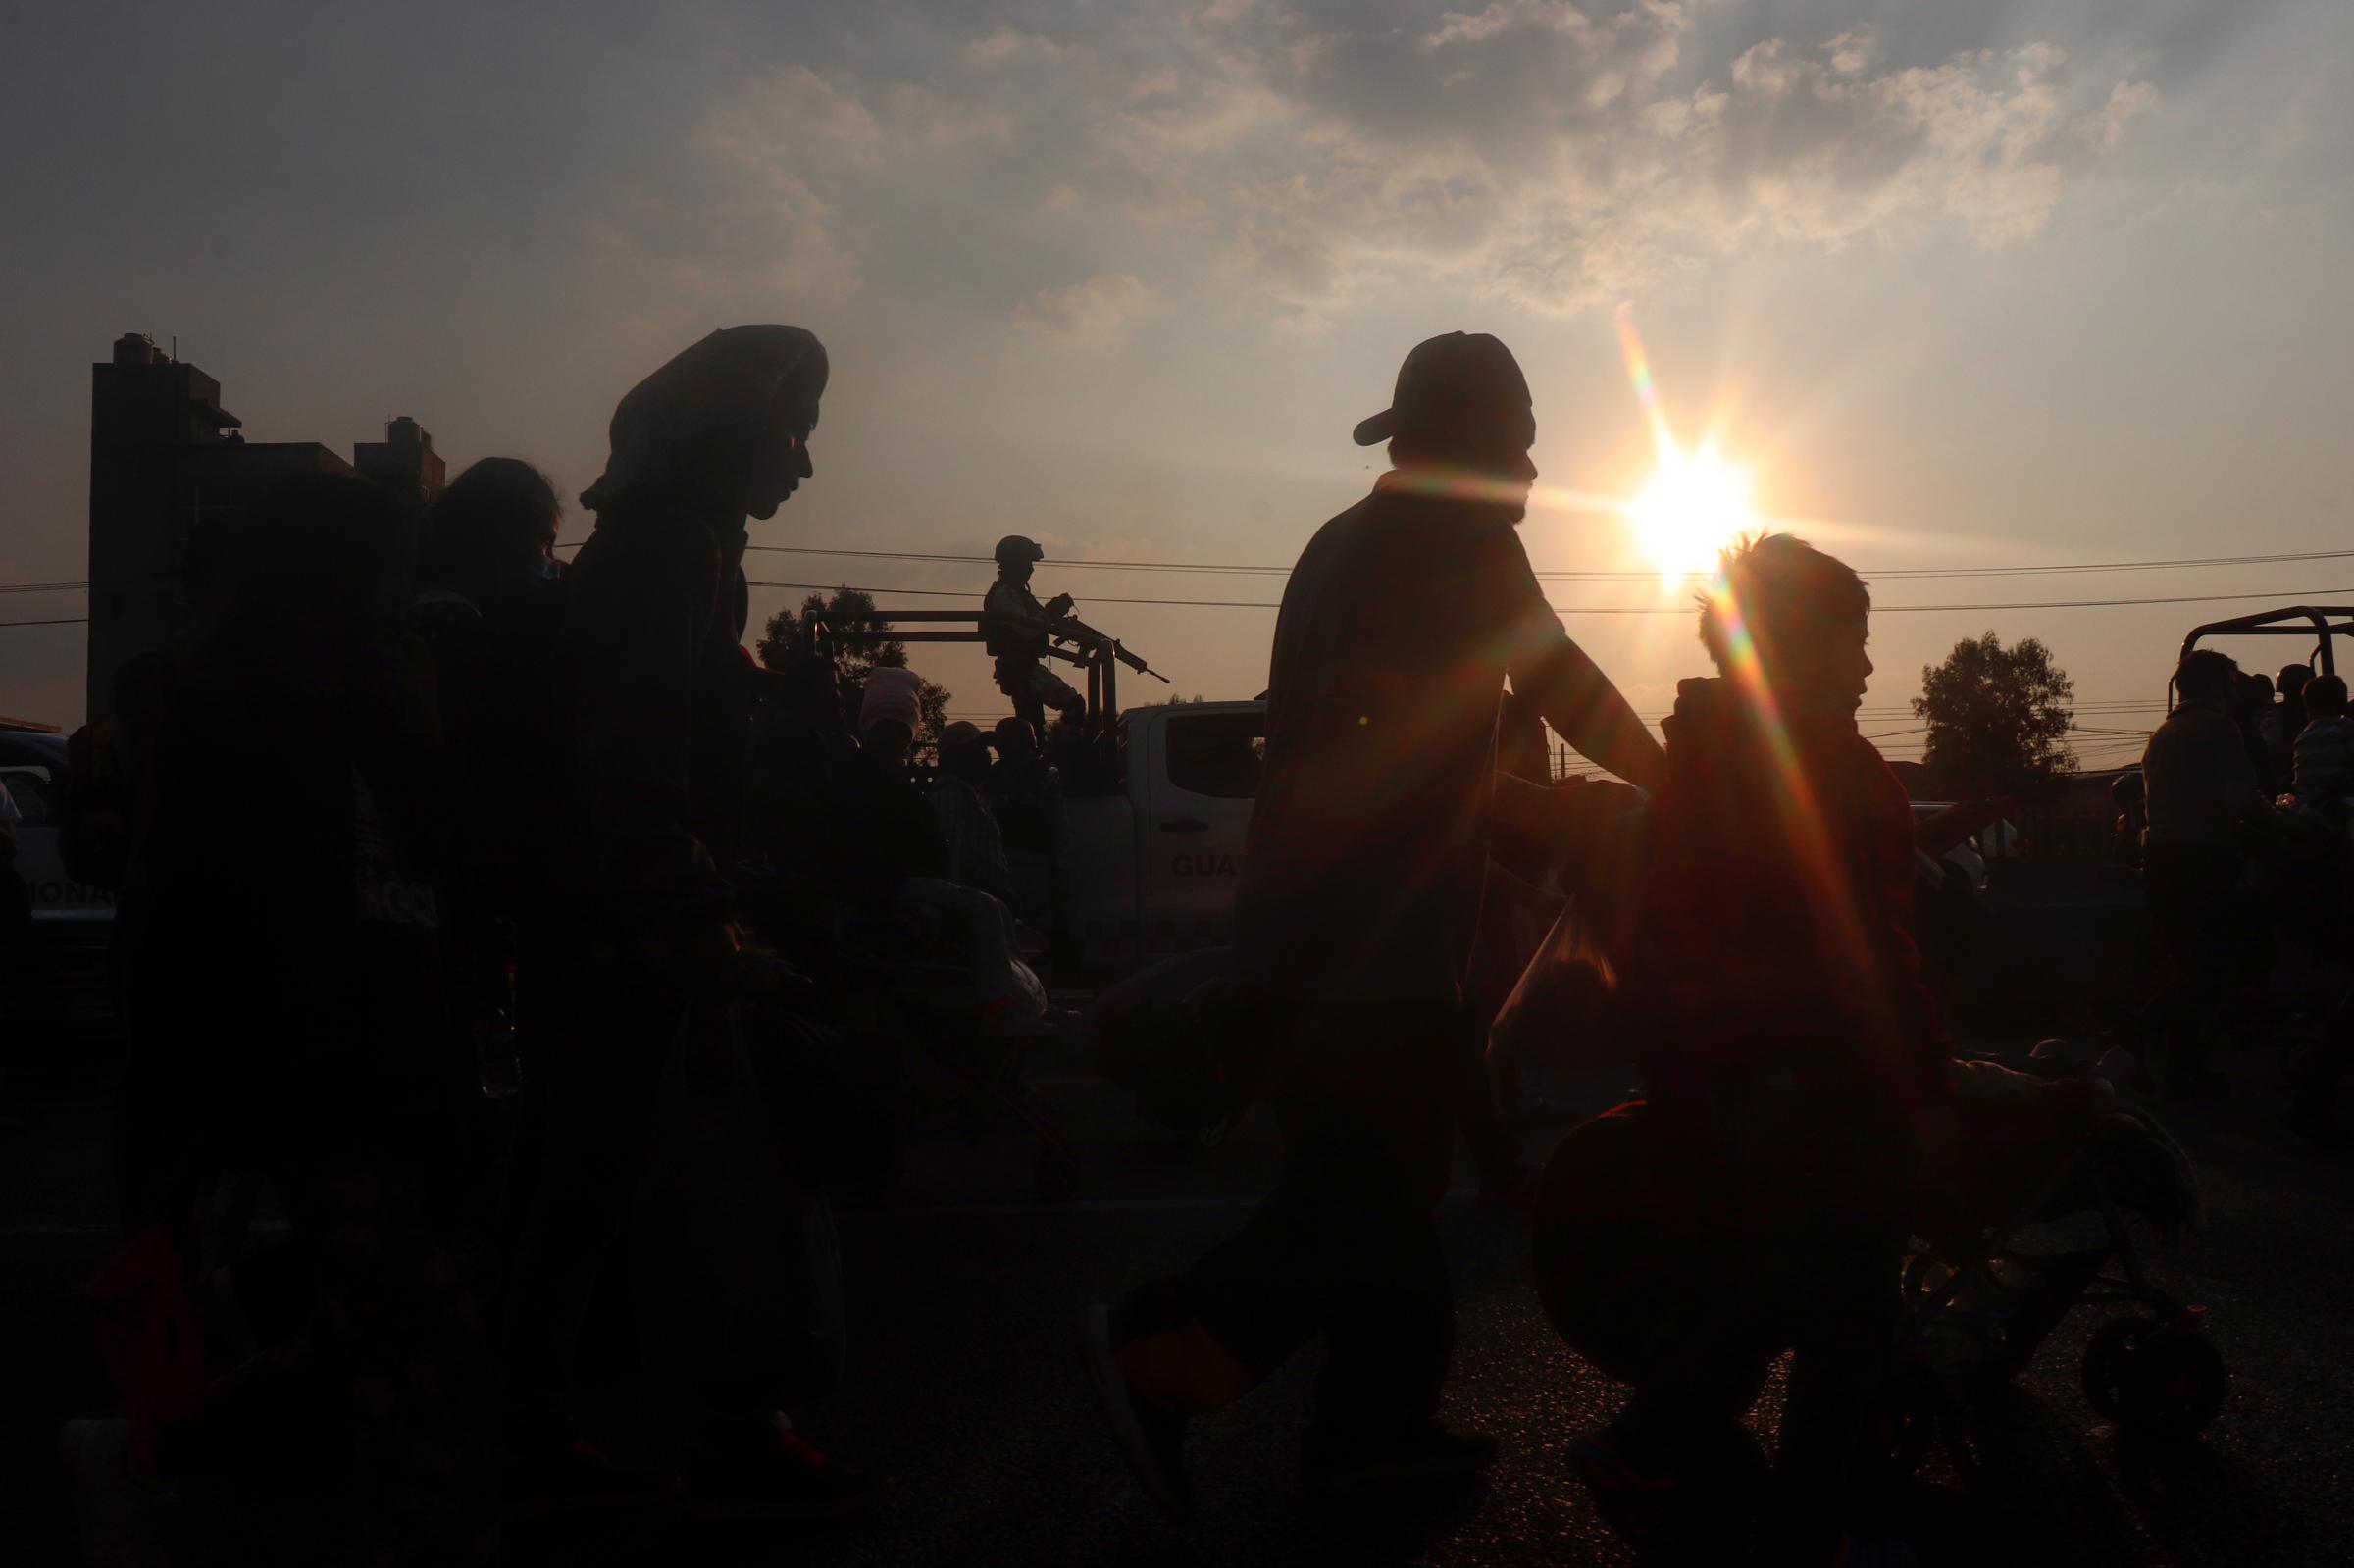 Migrant caravan: Wideline and Quintin -   The migrant caravan is guarded by the National Guard...